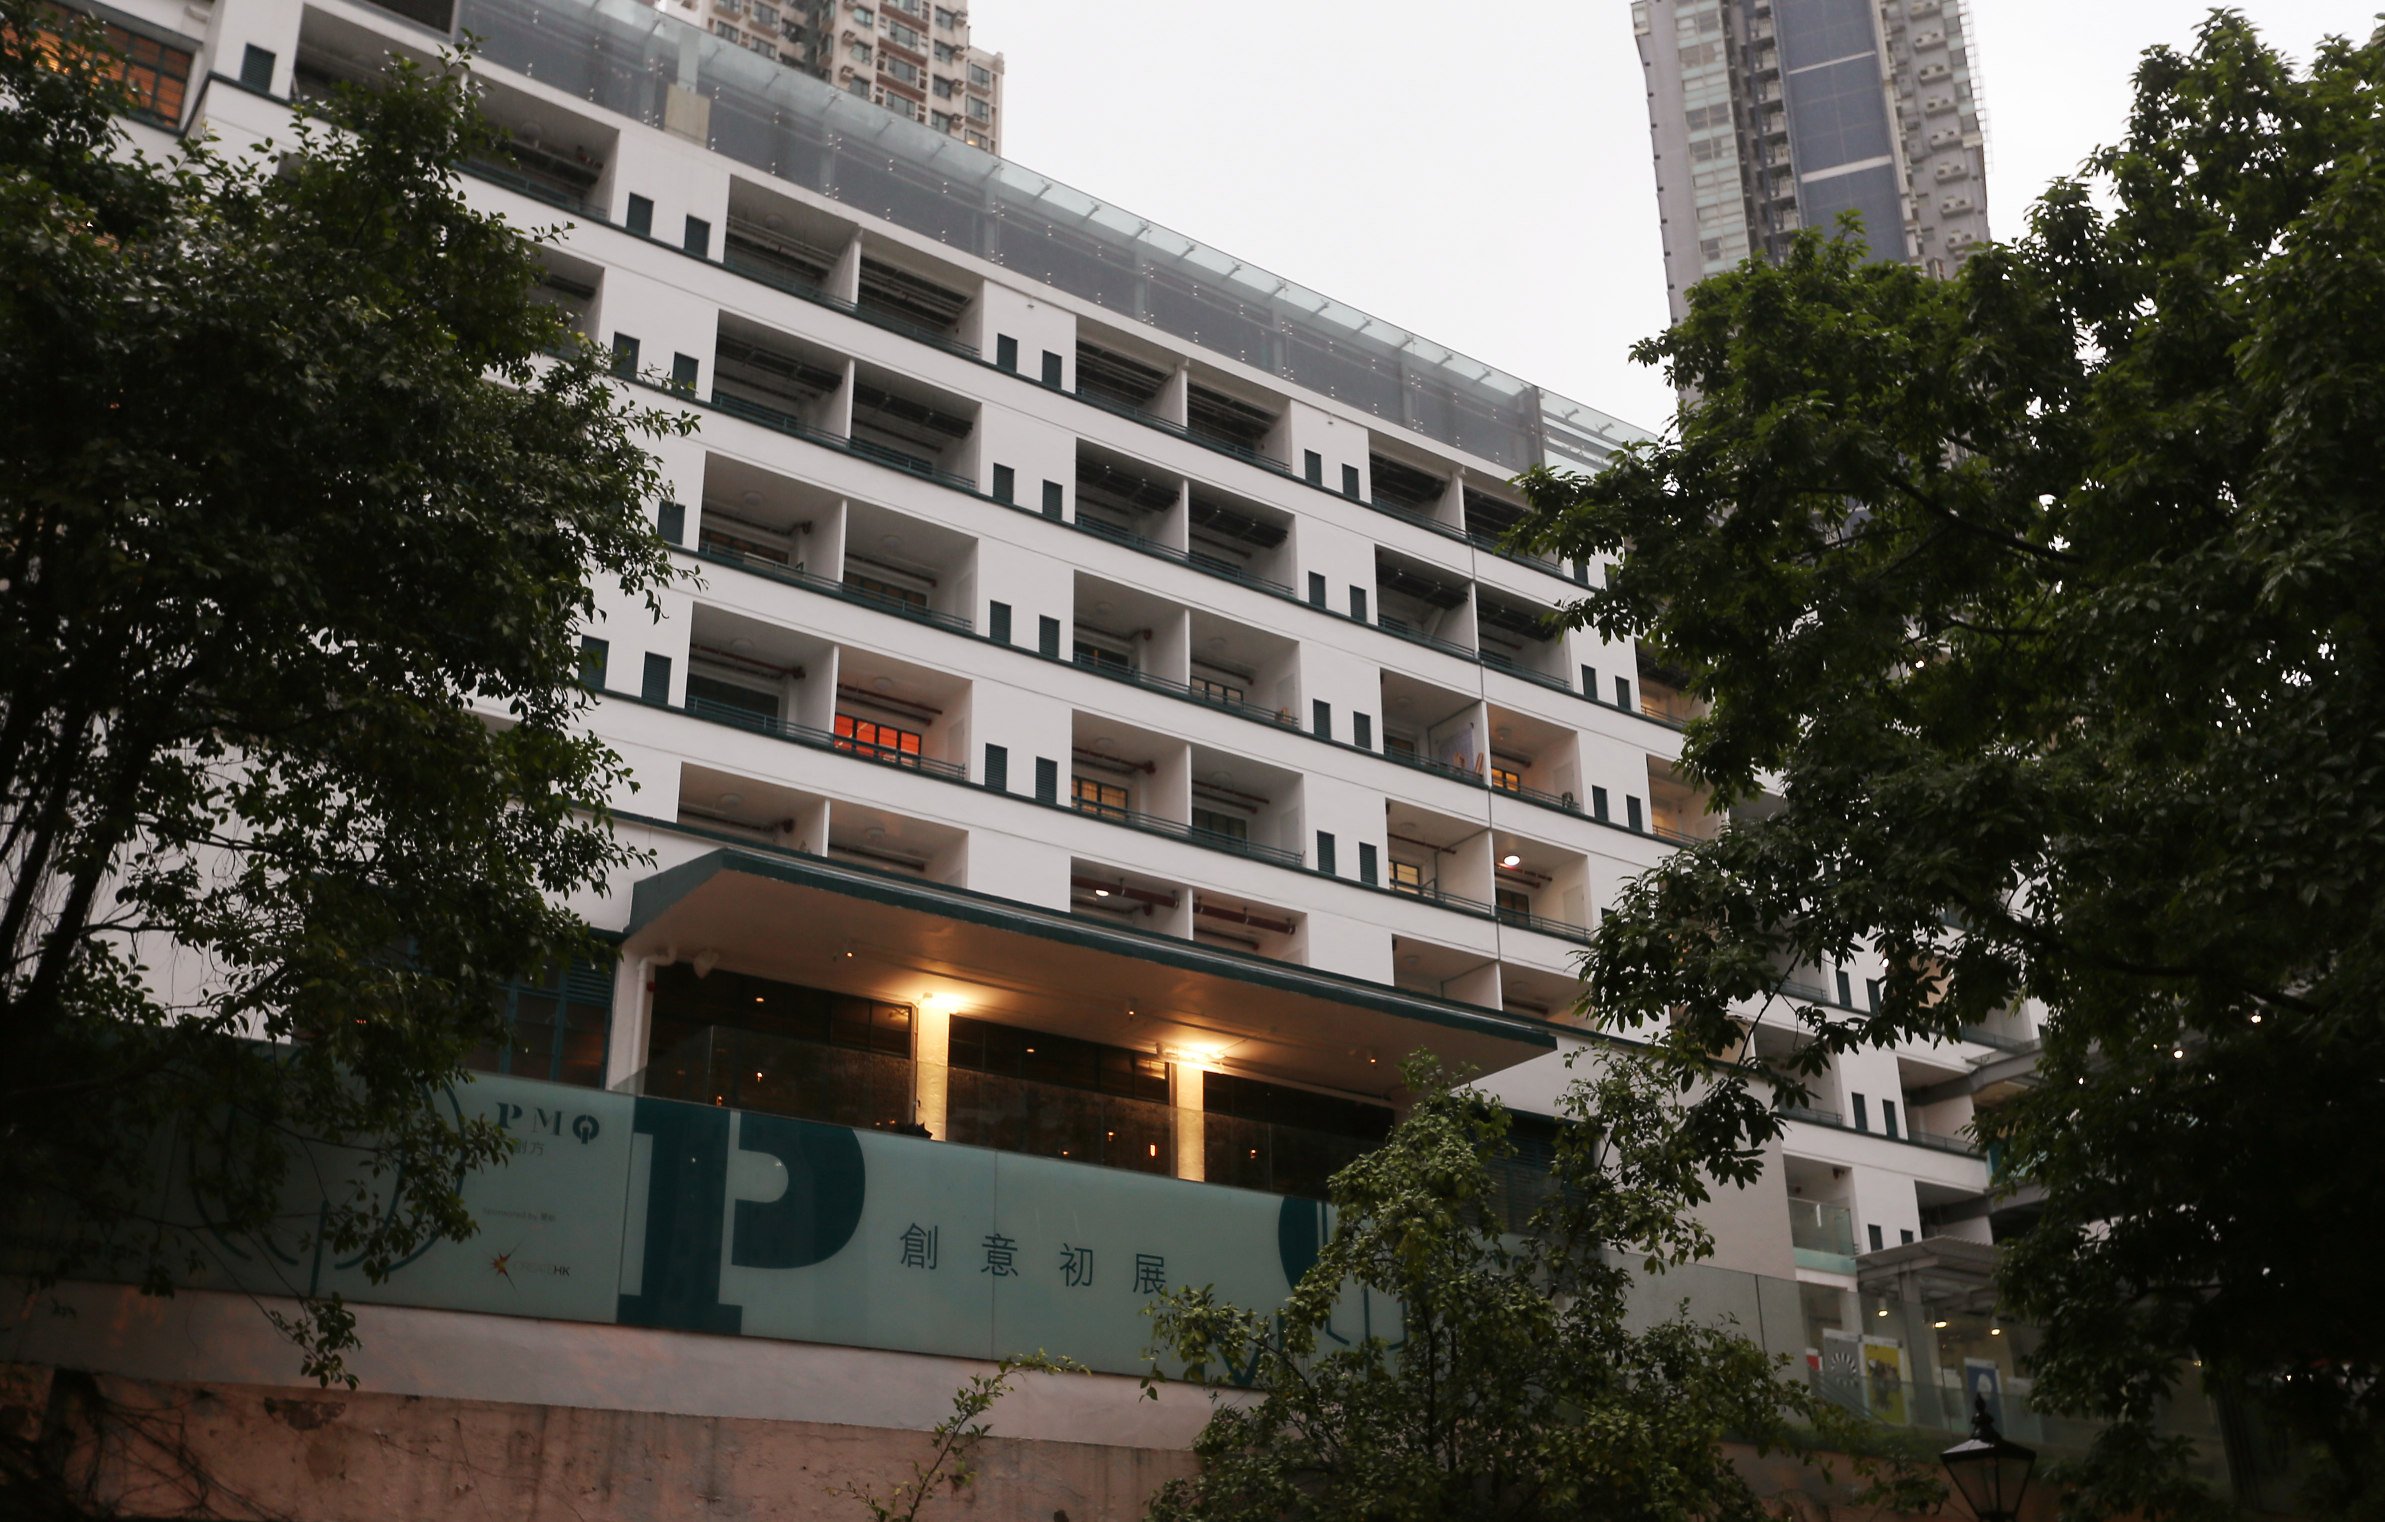 Being former residential blocks, the PMQ is a complex that is difficult to move around and navigate through. Photo: K. Y. Cheng 